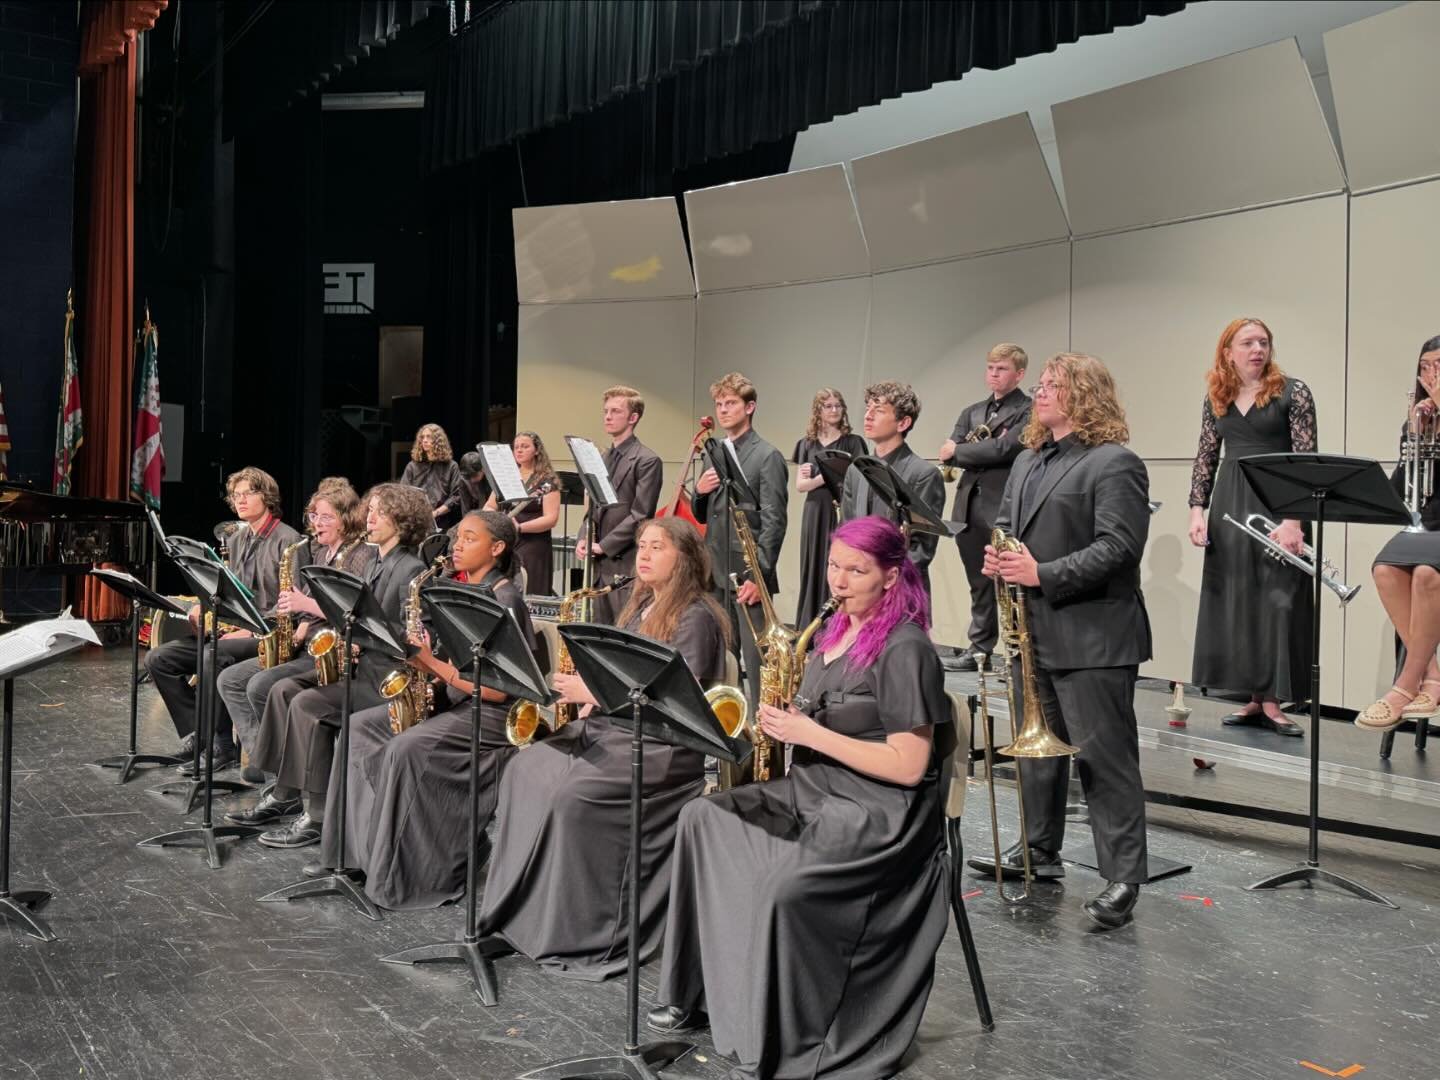 CONGRATS! To the Loudoun Valley Jazz Ensemble for receiving straight SUPERIOR ratings at assessment this weekend! Want to hear them live? Catch the LVJE at 12:05PM on Saturday, May 11th at the Chantilly Jazz Festival. 🎶😎